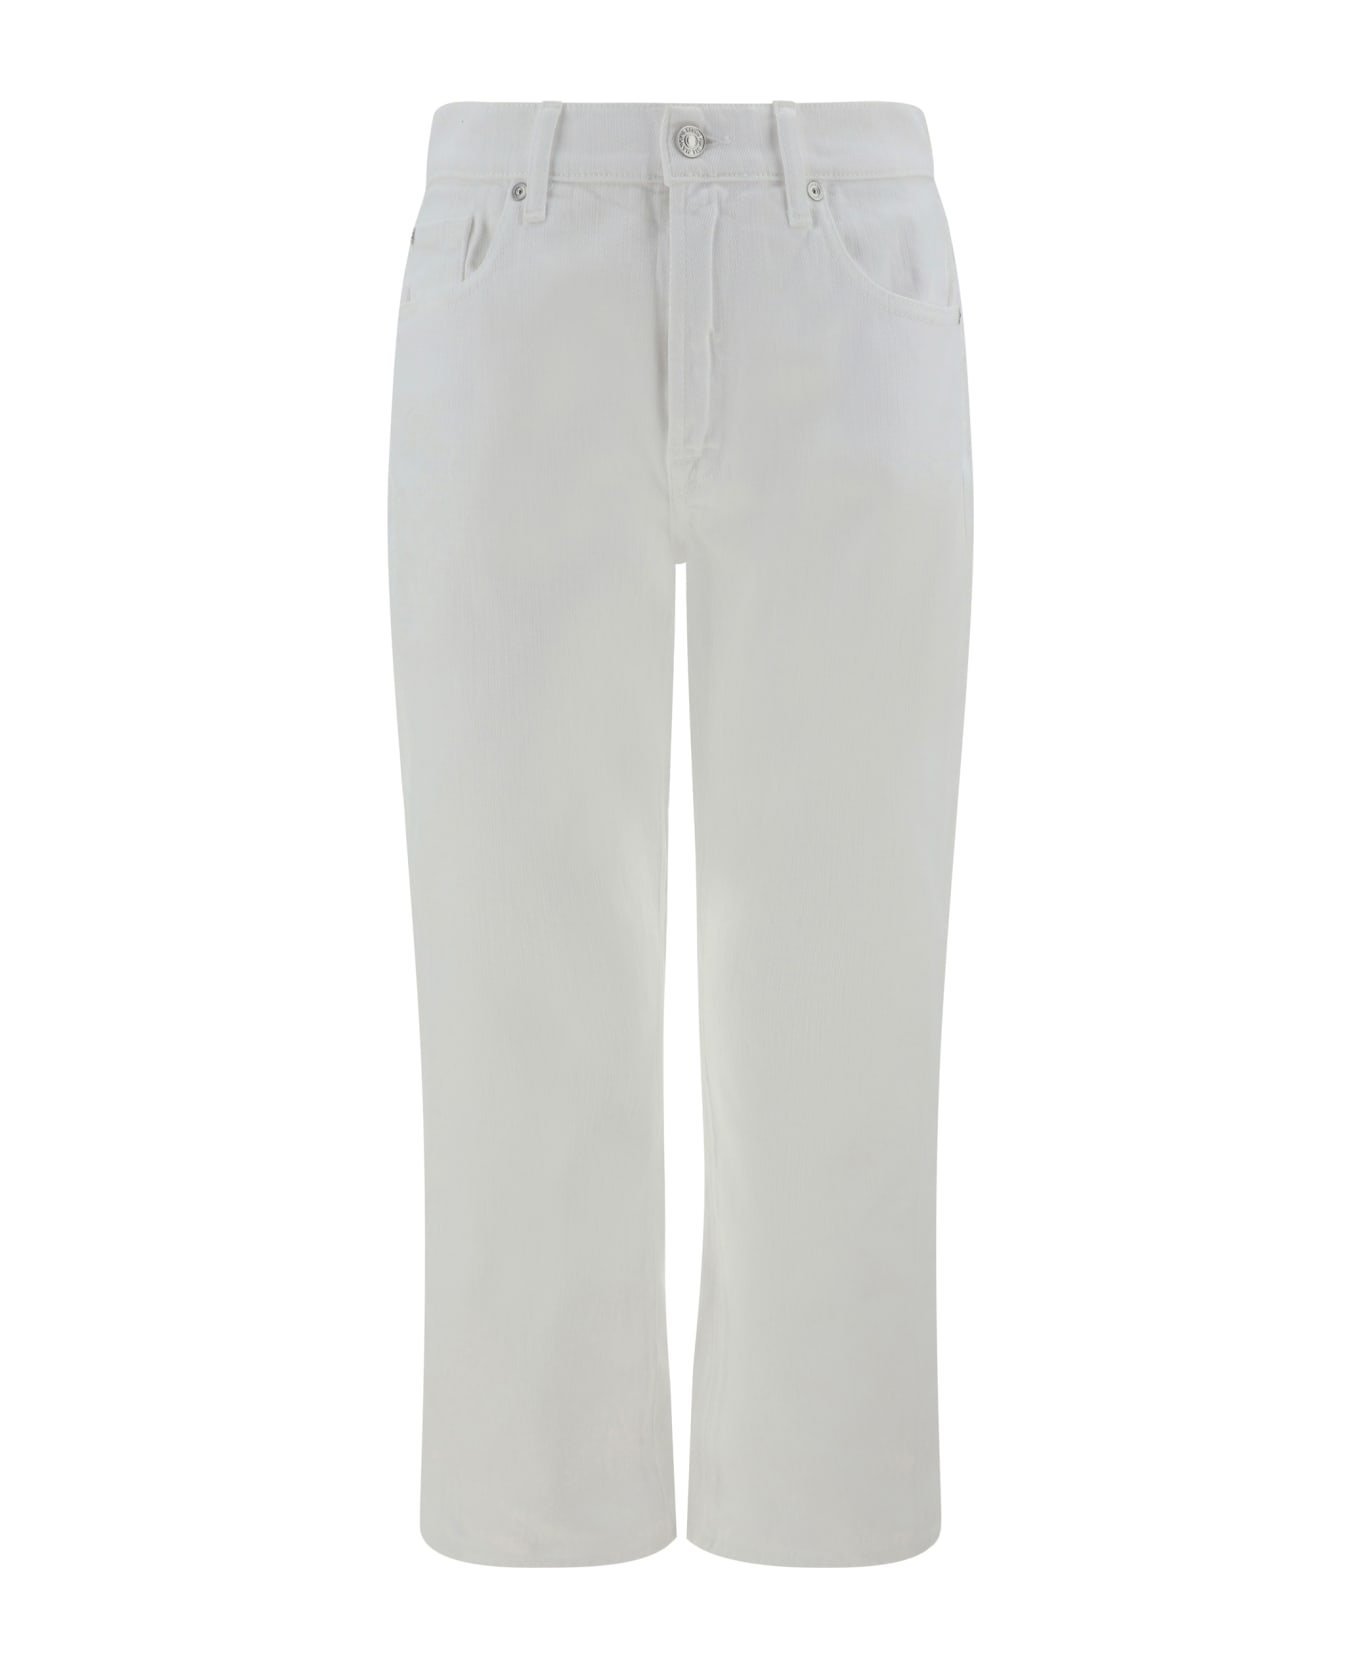 7 For All Mankind The Modern Yacht Jeans - White